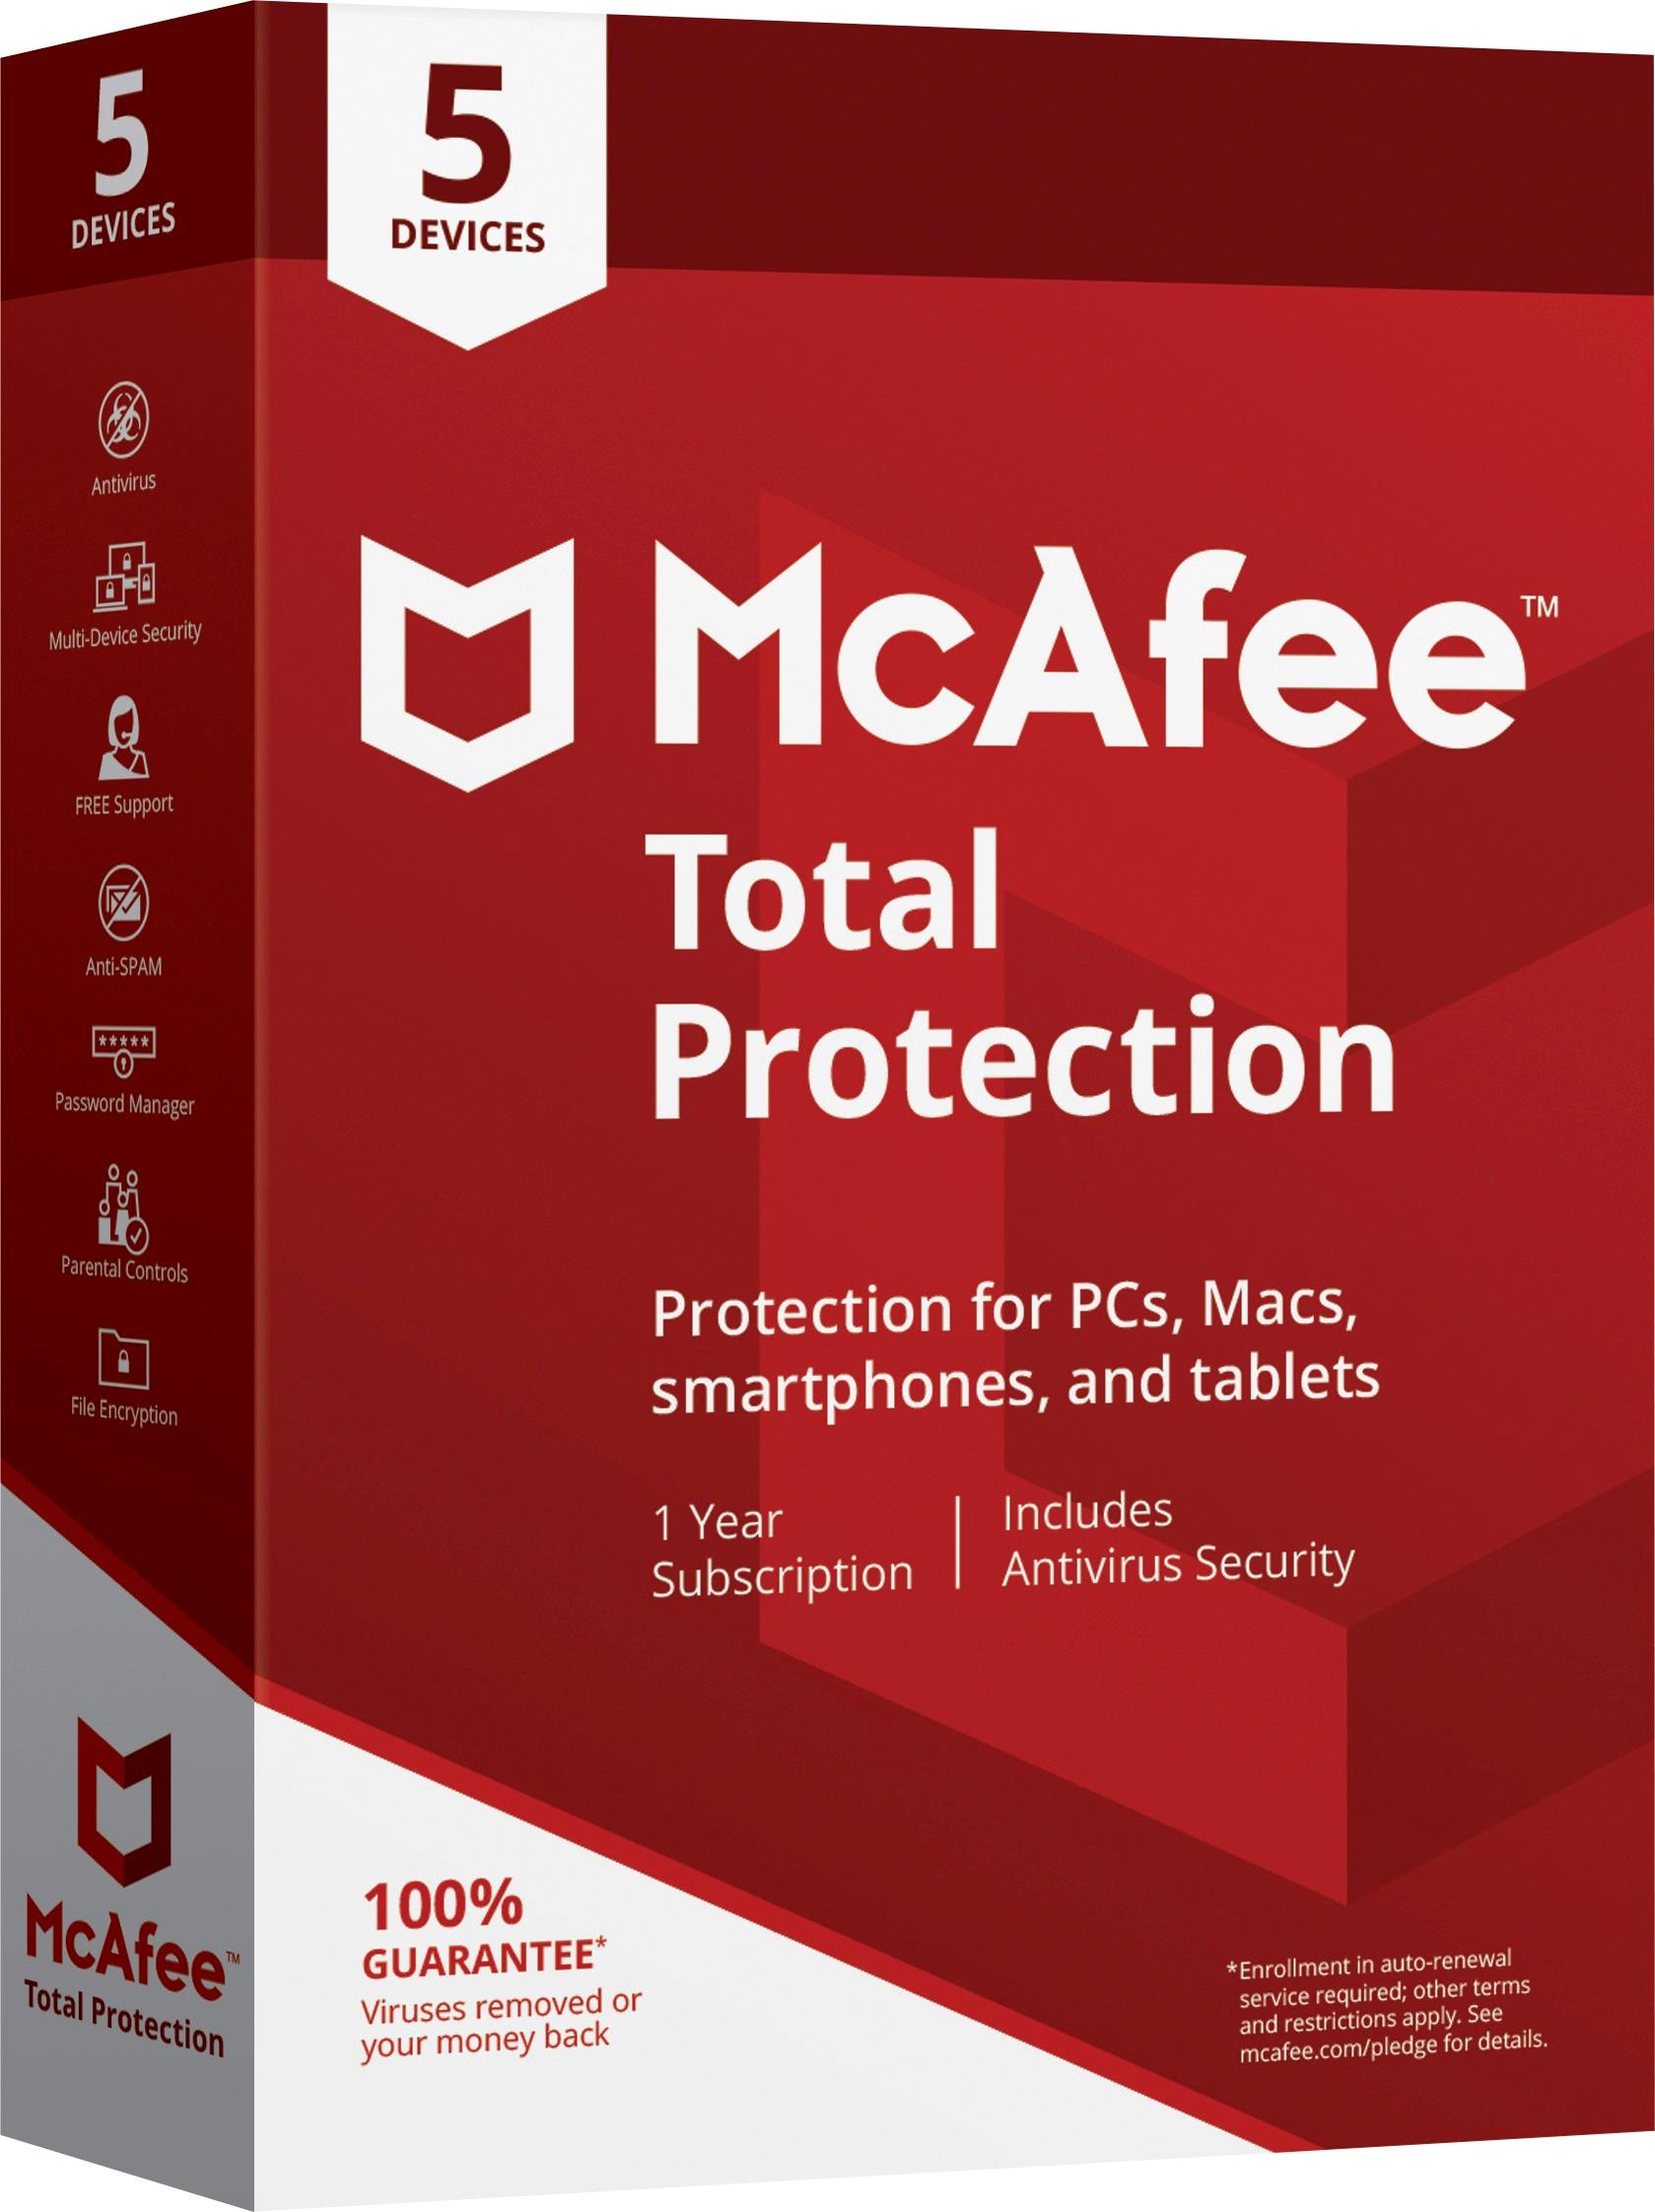 McAfee Total Protection (5 Devices) (1-Year Subscription) - Android|Mac|Windows|iOS